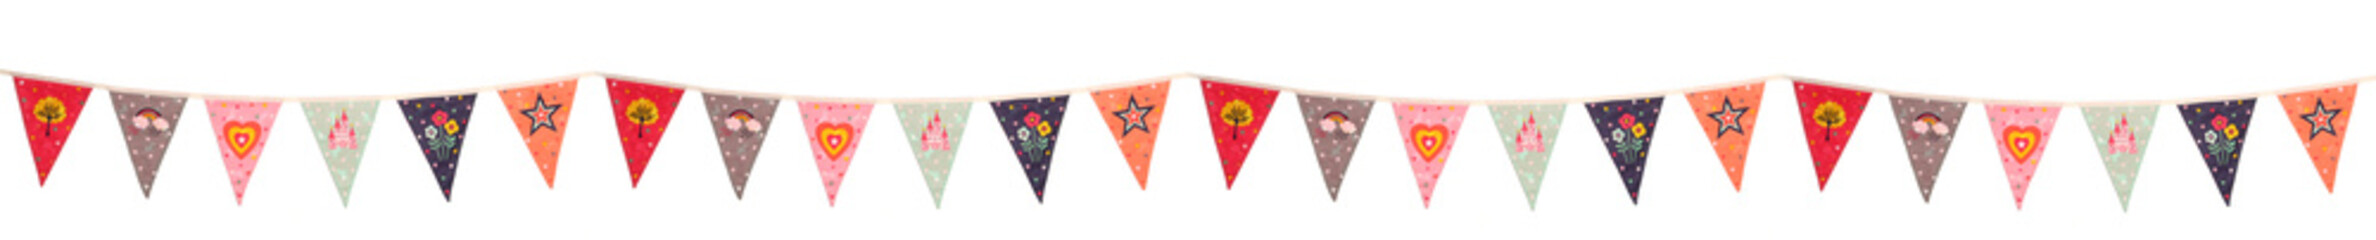 Kids bedroom bunting isolated on a white background